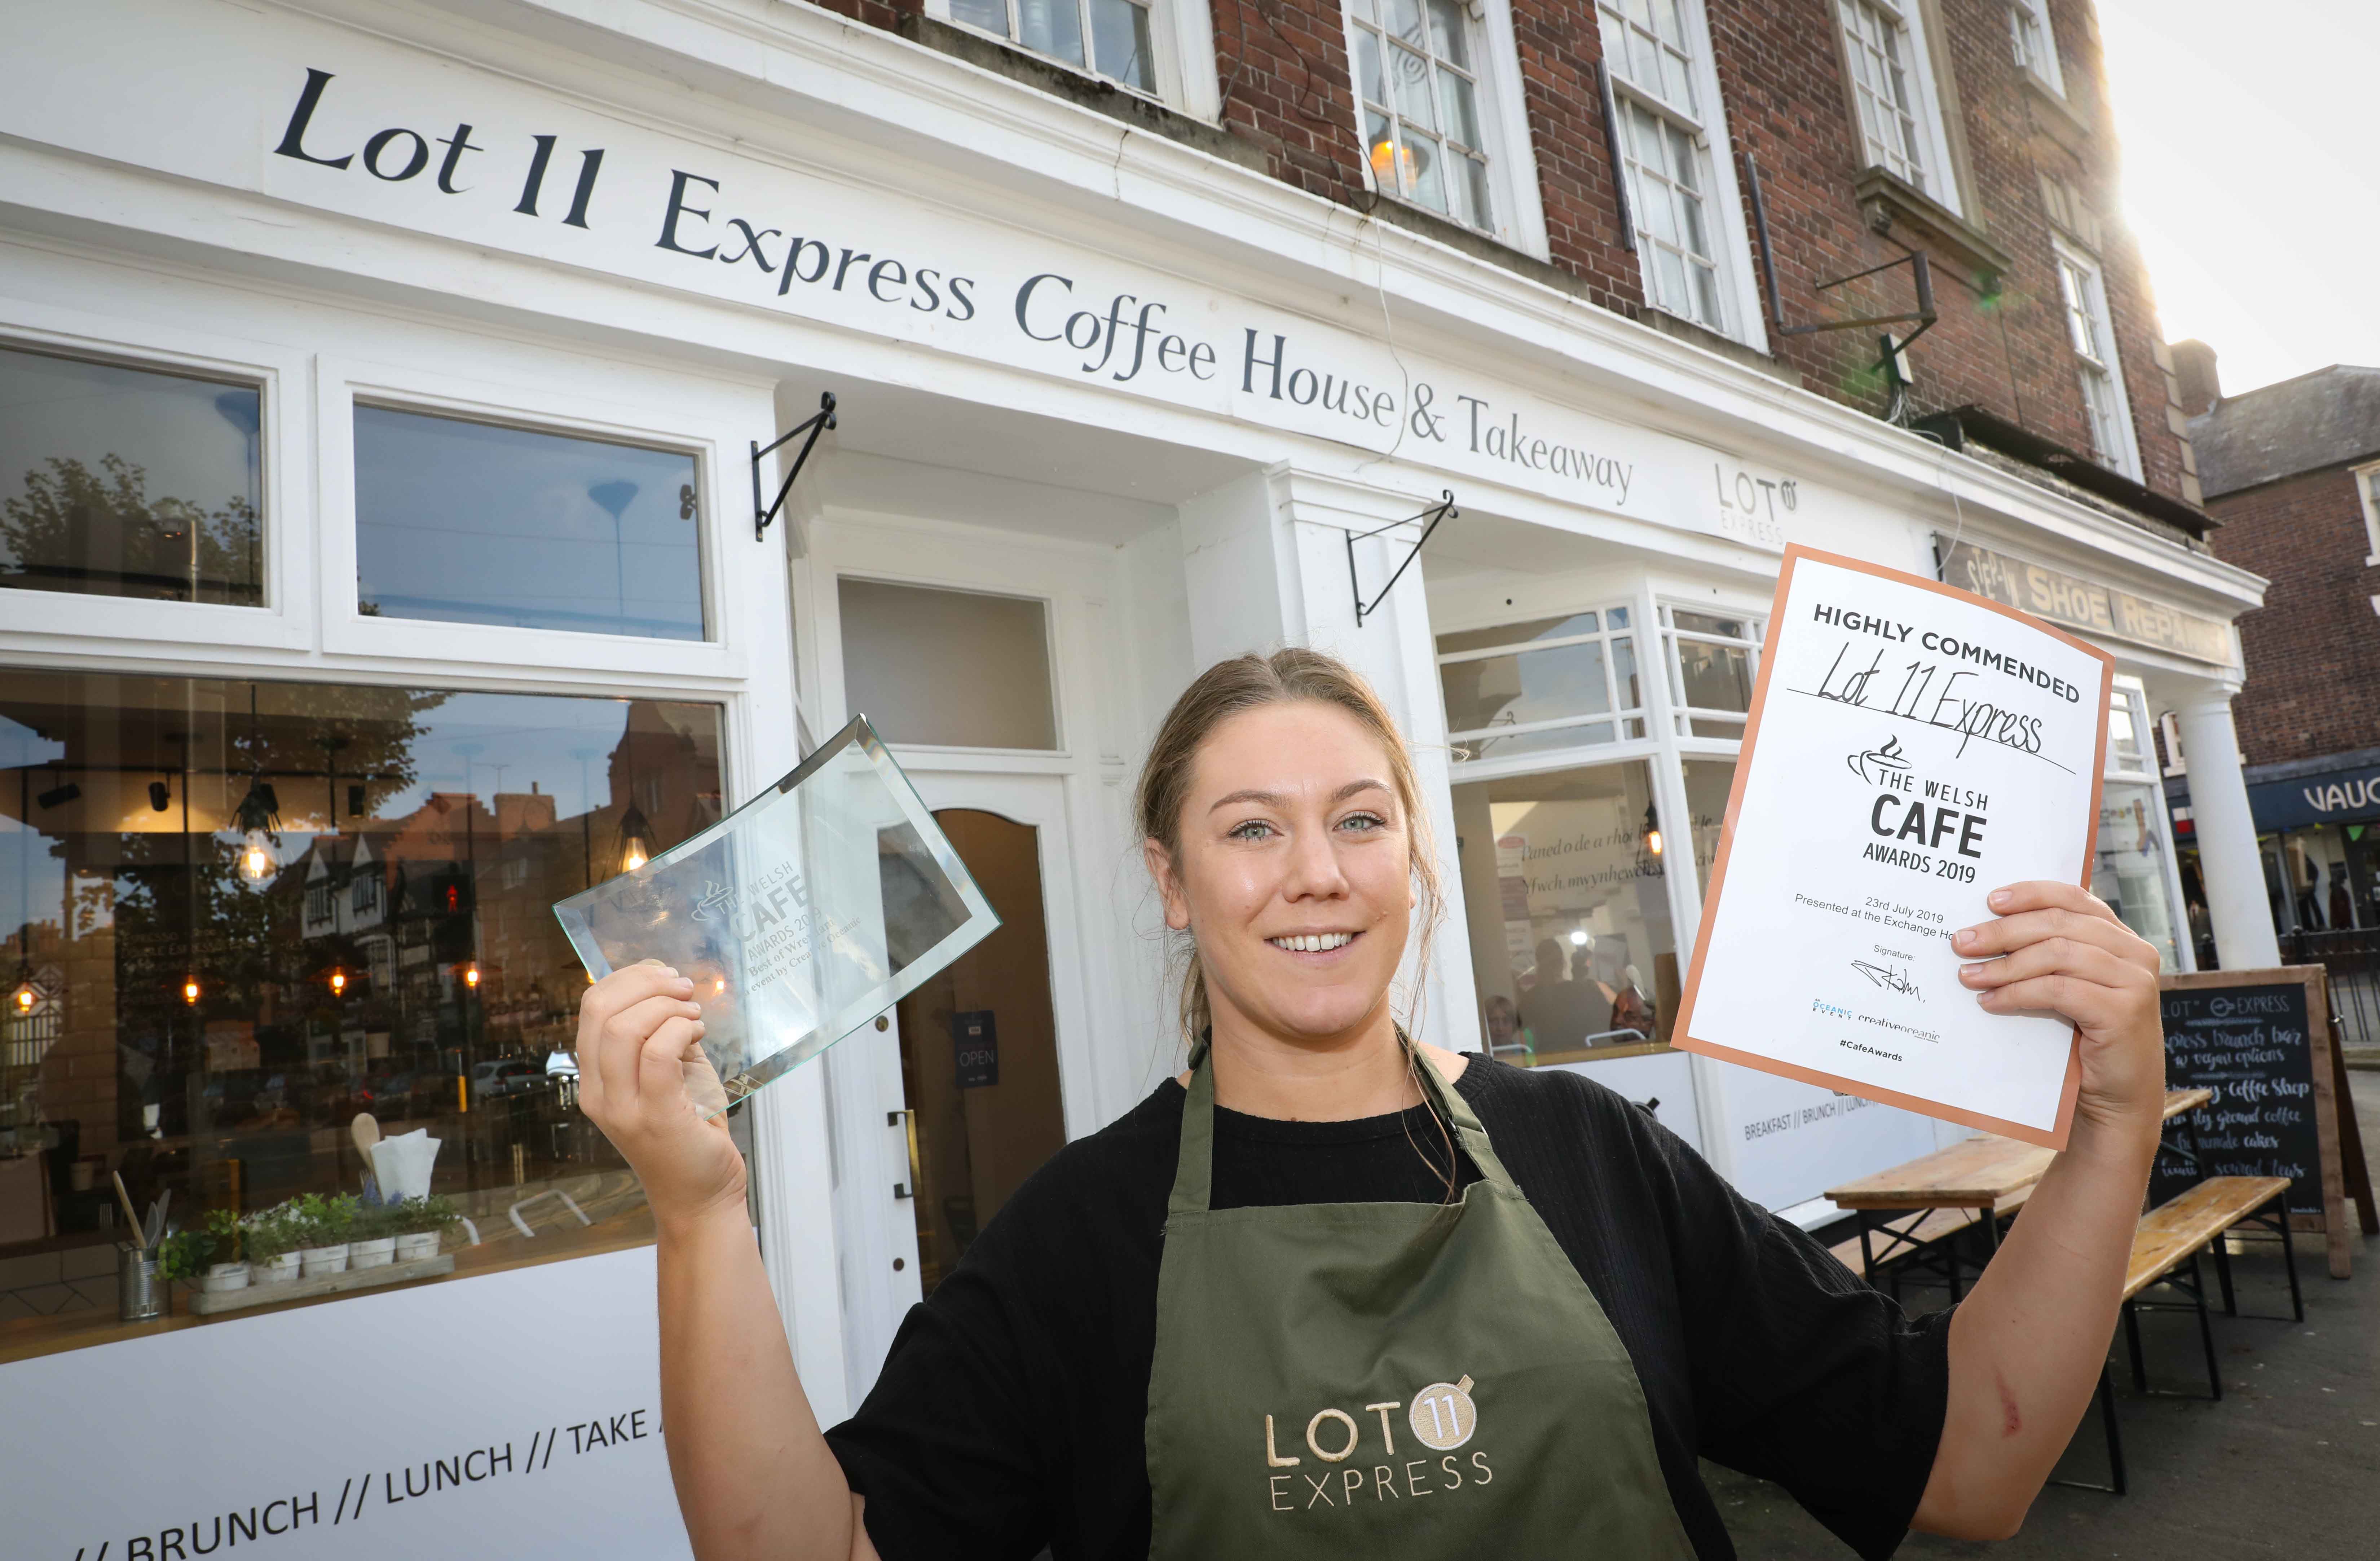 Award-winning Mold café launches £20,000 expansion to double capacity